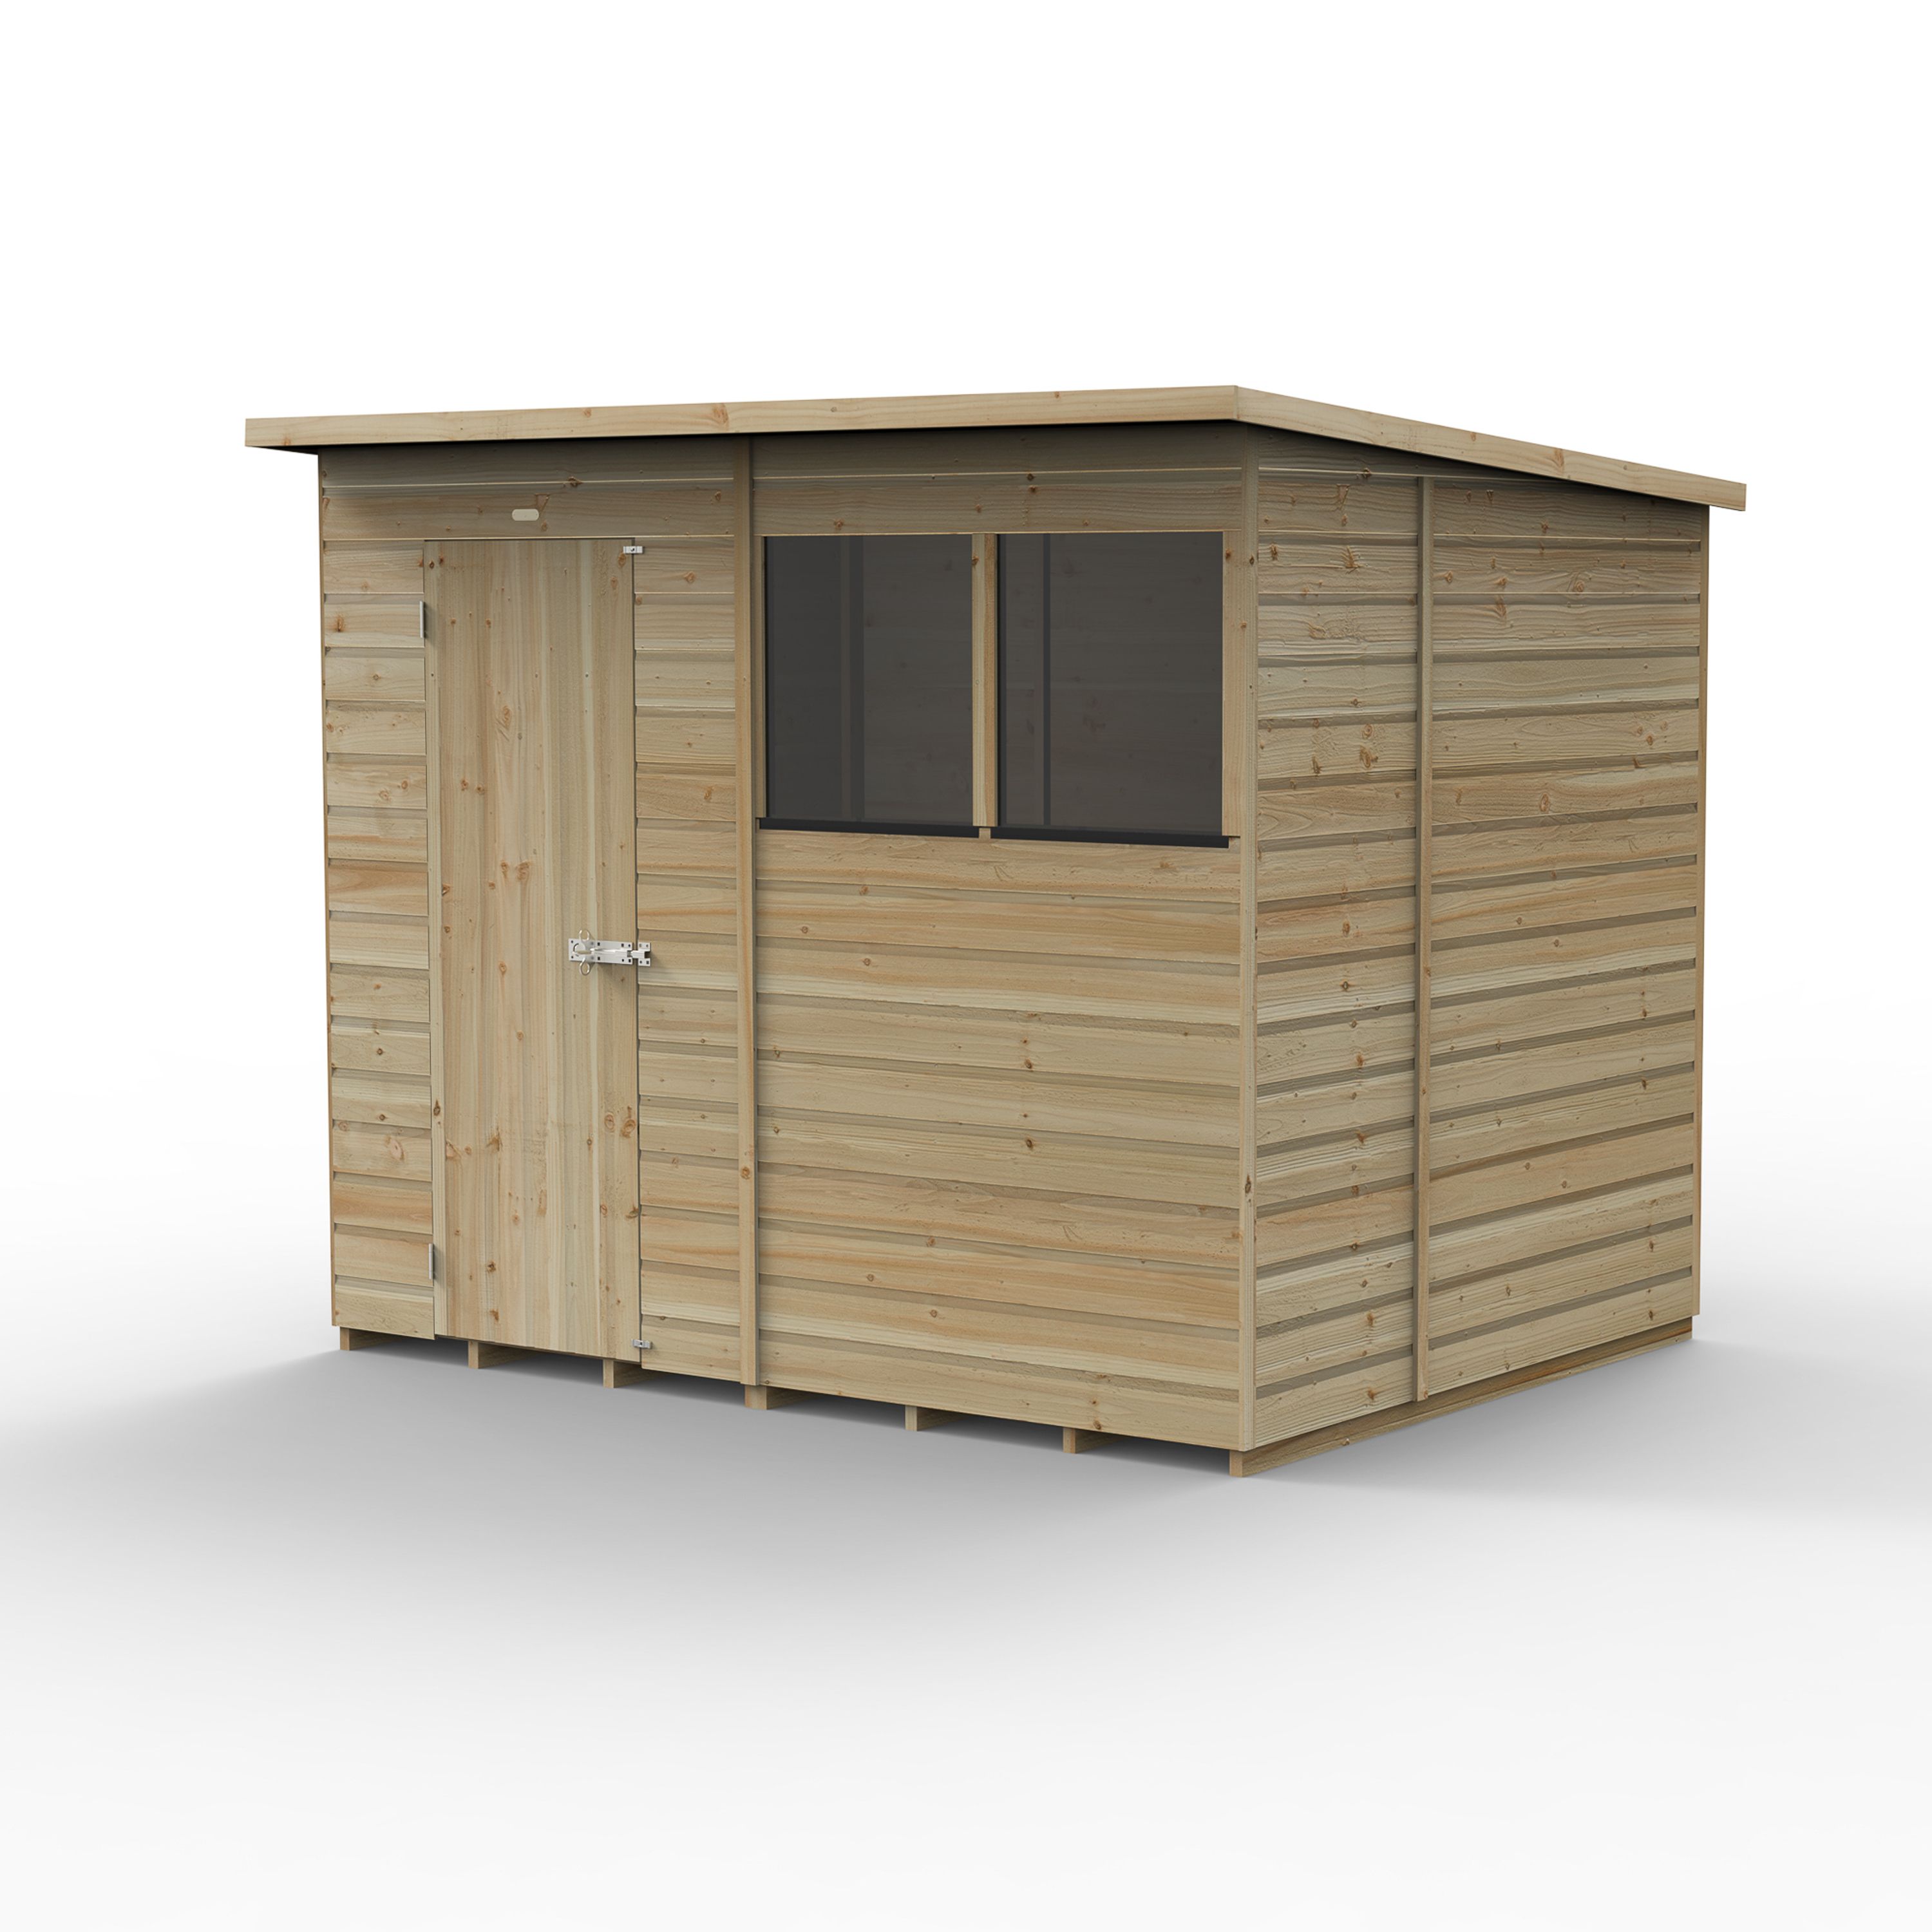 Forest Garden Beckwood 8x6 ft Pent Natural timber Wooden Shed with floor & 2 windows - Assembly not required